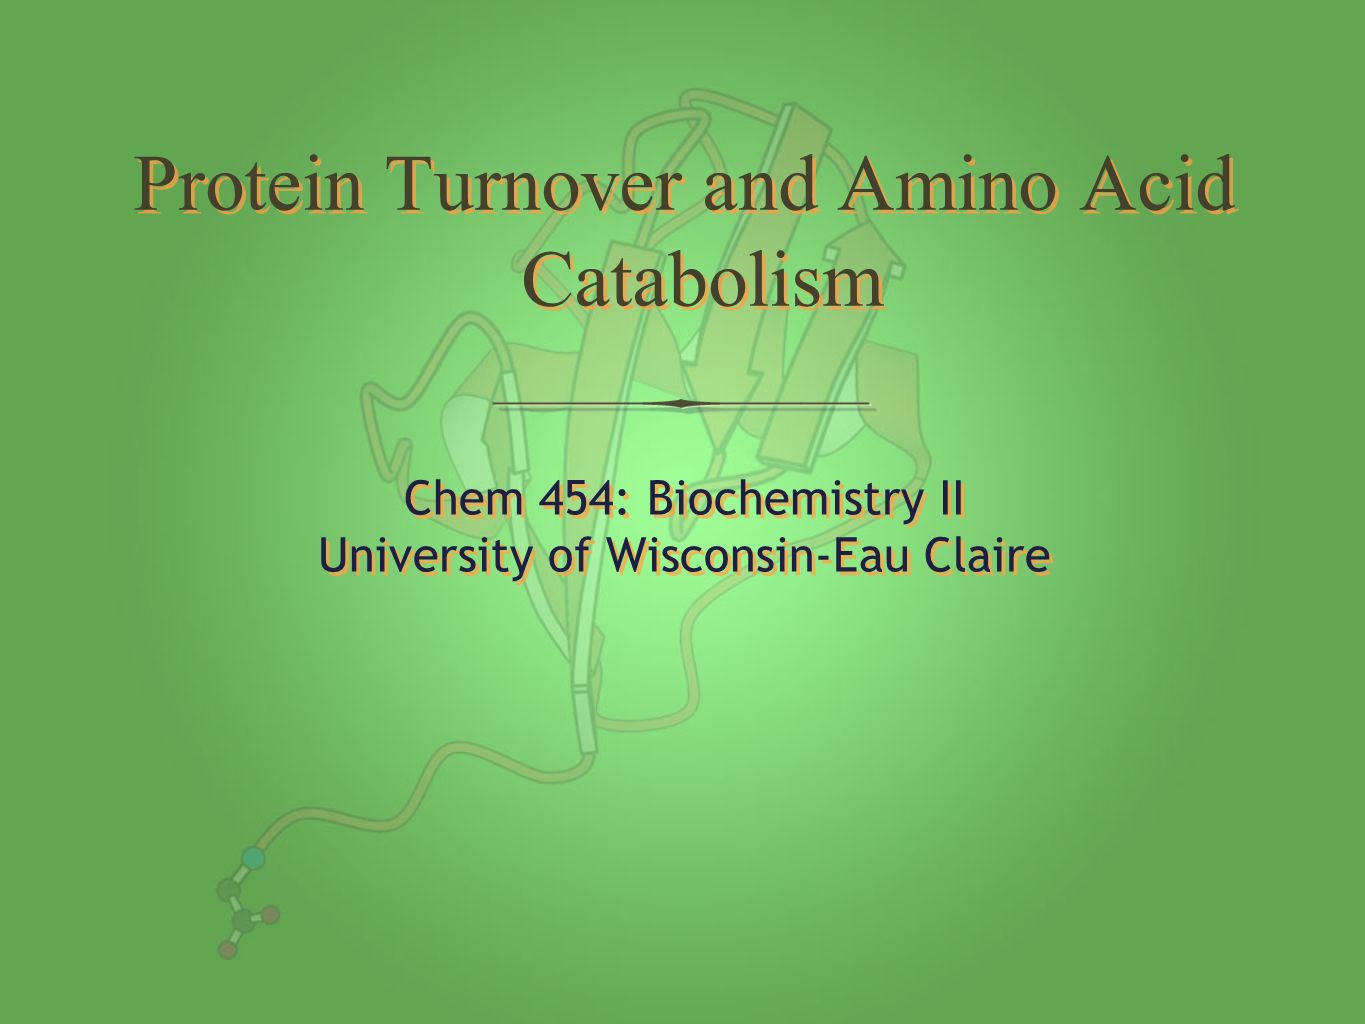 Chem 454: Biochemistry II University of Wisconsin-Eau Claire Chem 454: Biochemistry II University of Wisconsin-Eau Claire Protein Turnover and Amino Acid Catabolism